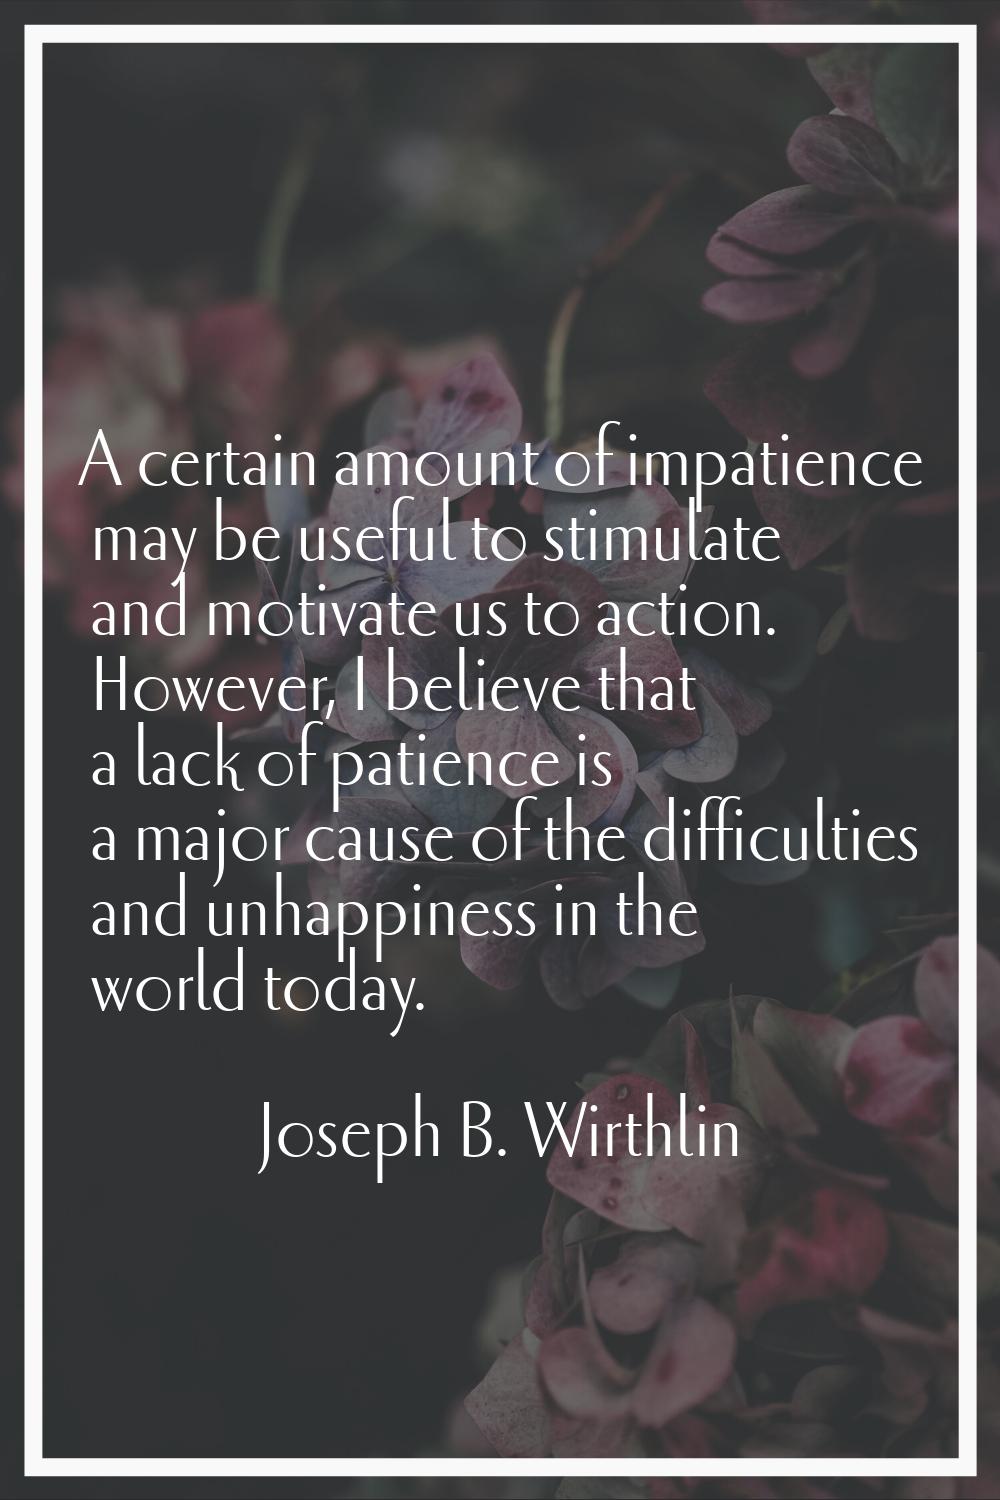 A certain amount of impatience may be useful to stimulate and motivate us to action. However, I bel